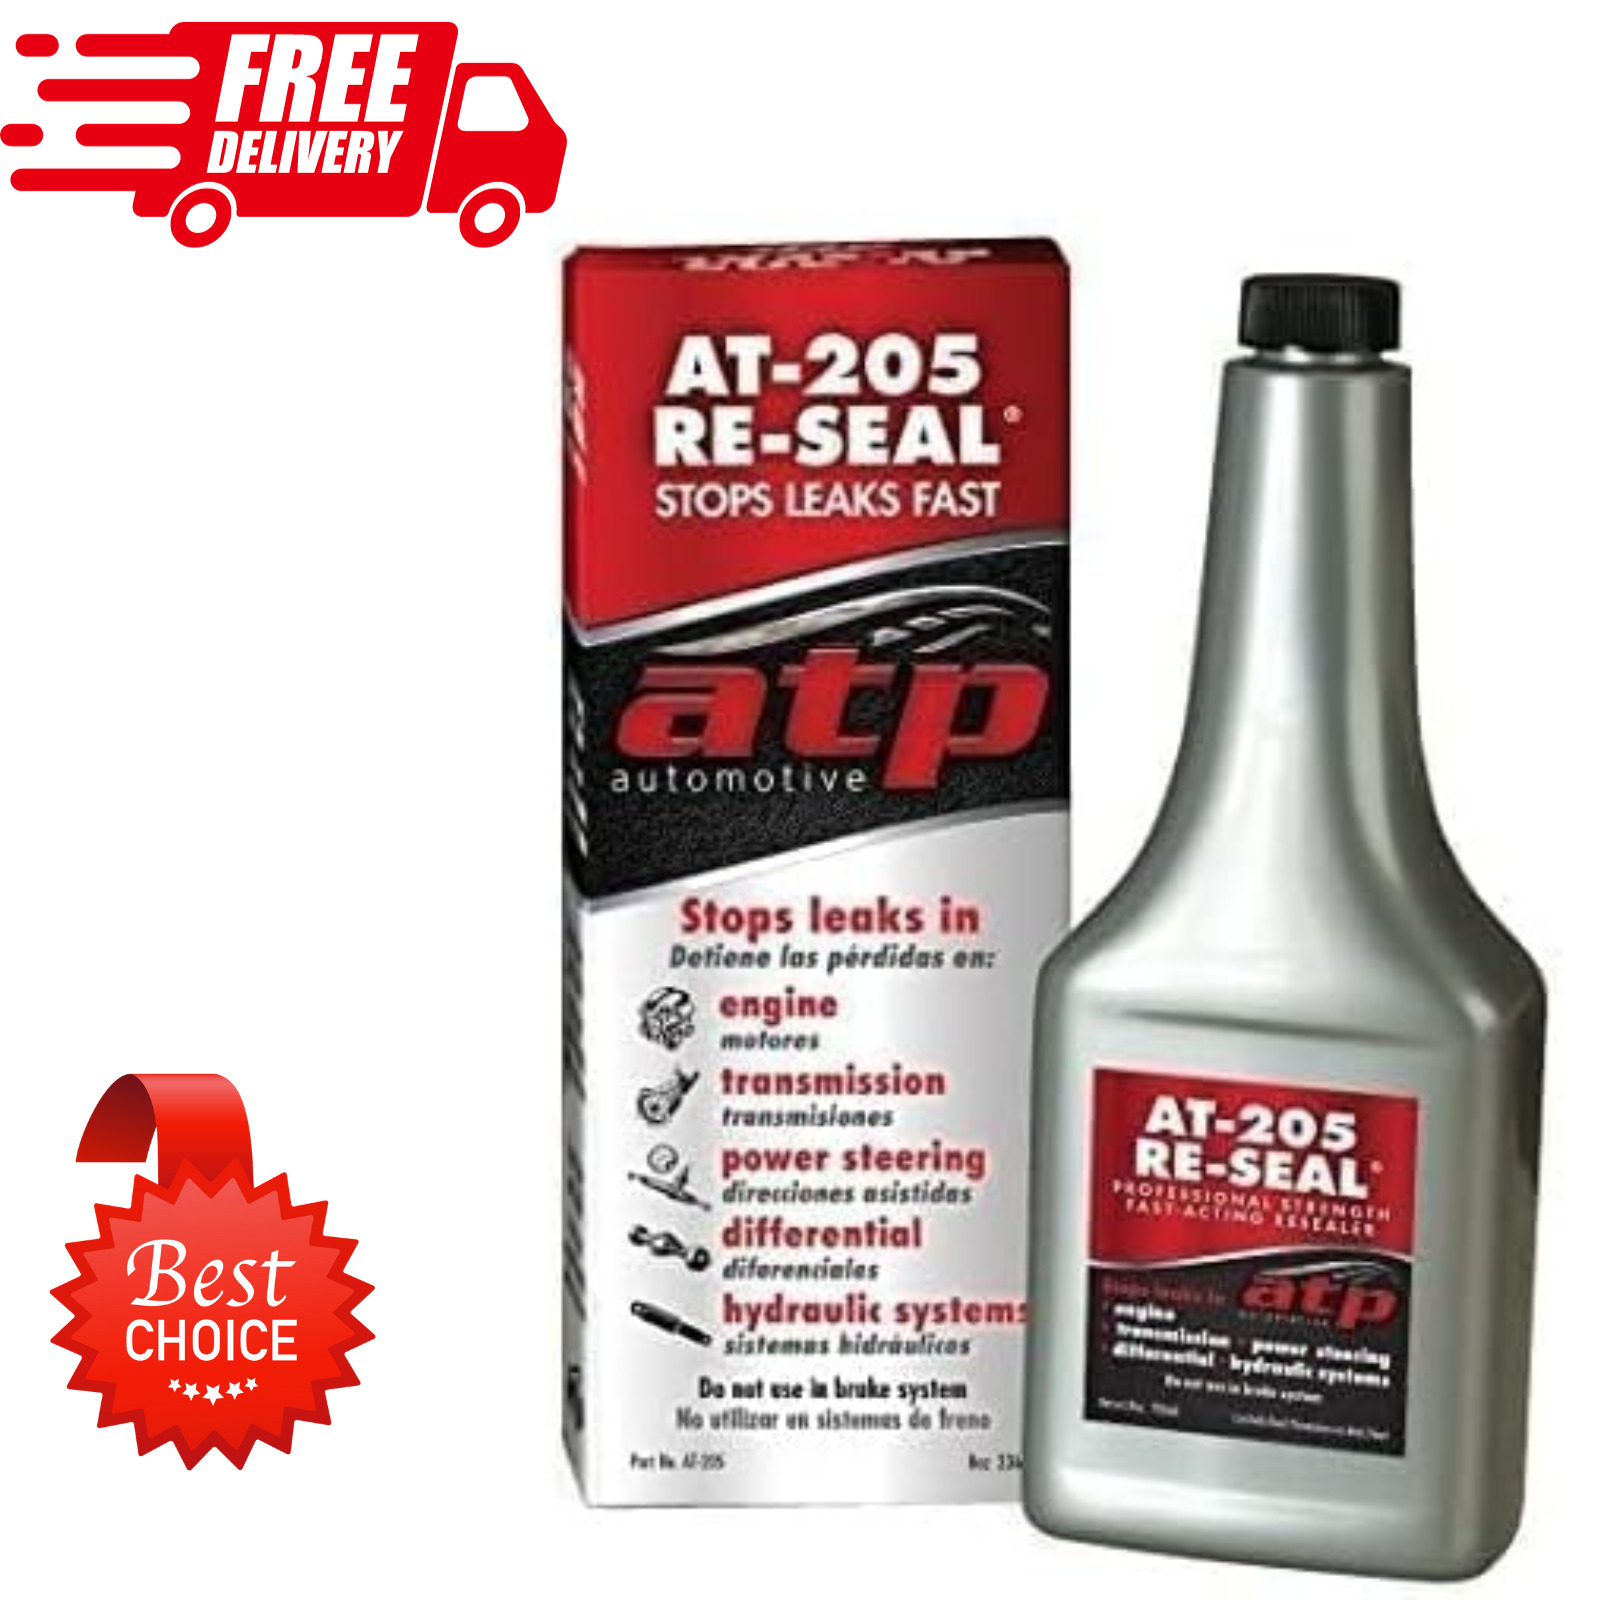 ATP Automotive AT-205 Re-Seal Stops Leaks, 8 Ounce Bottle.